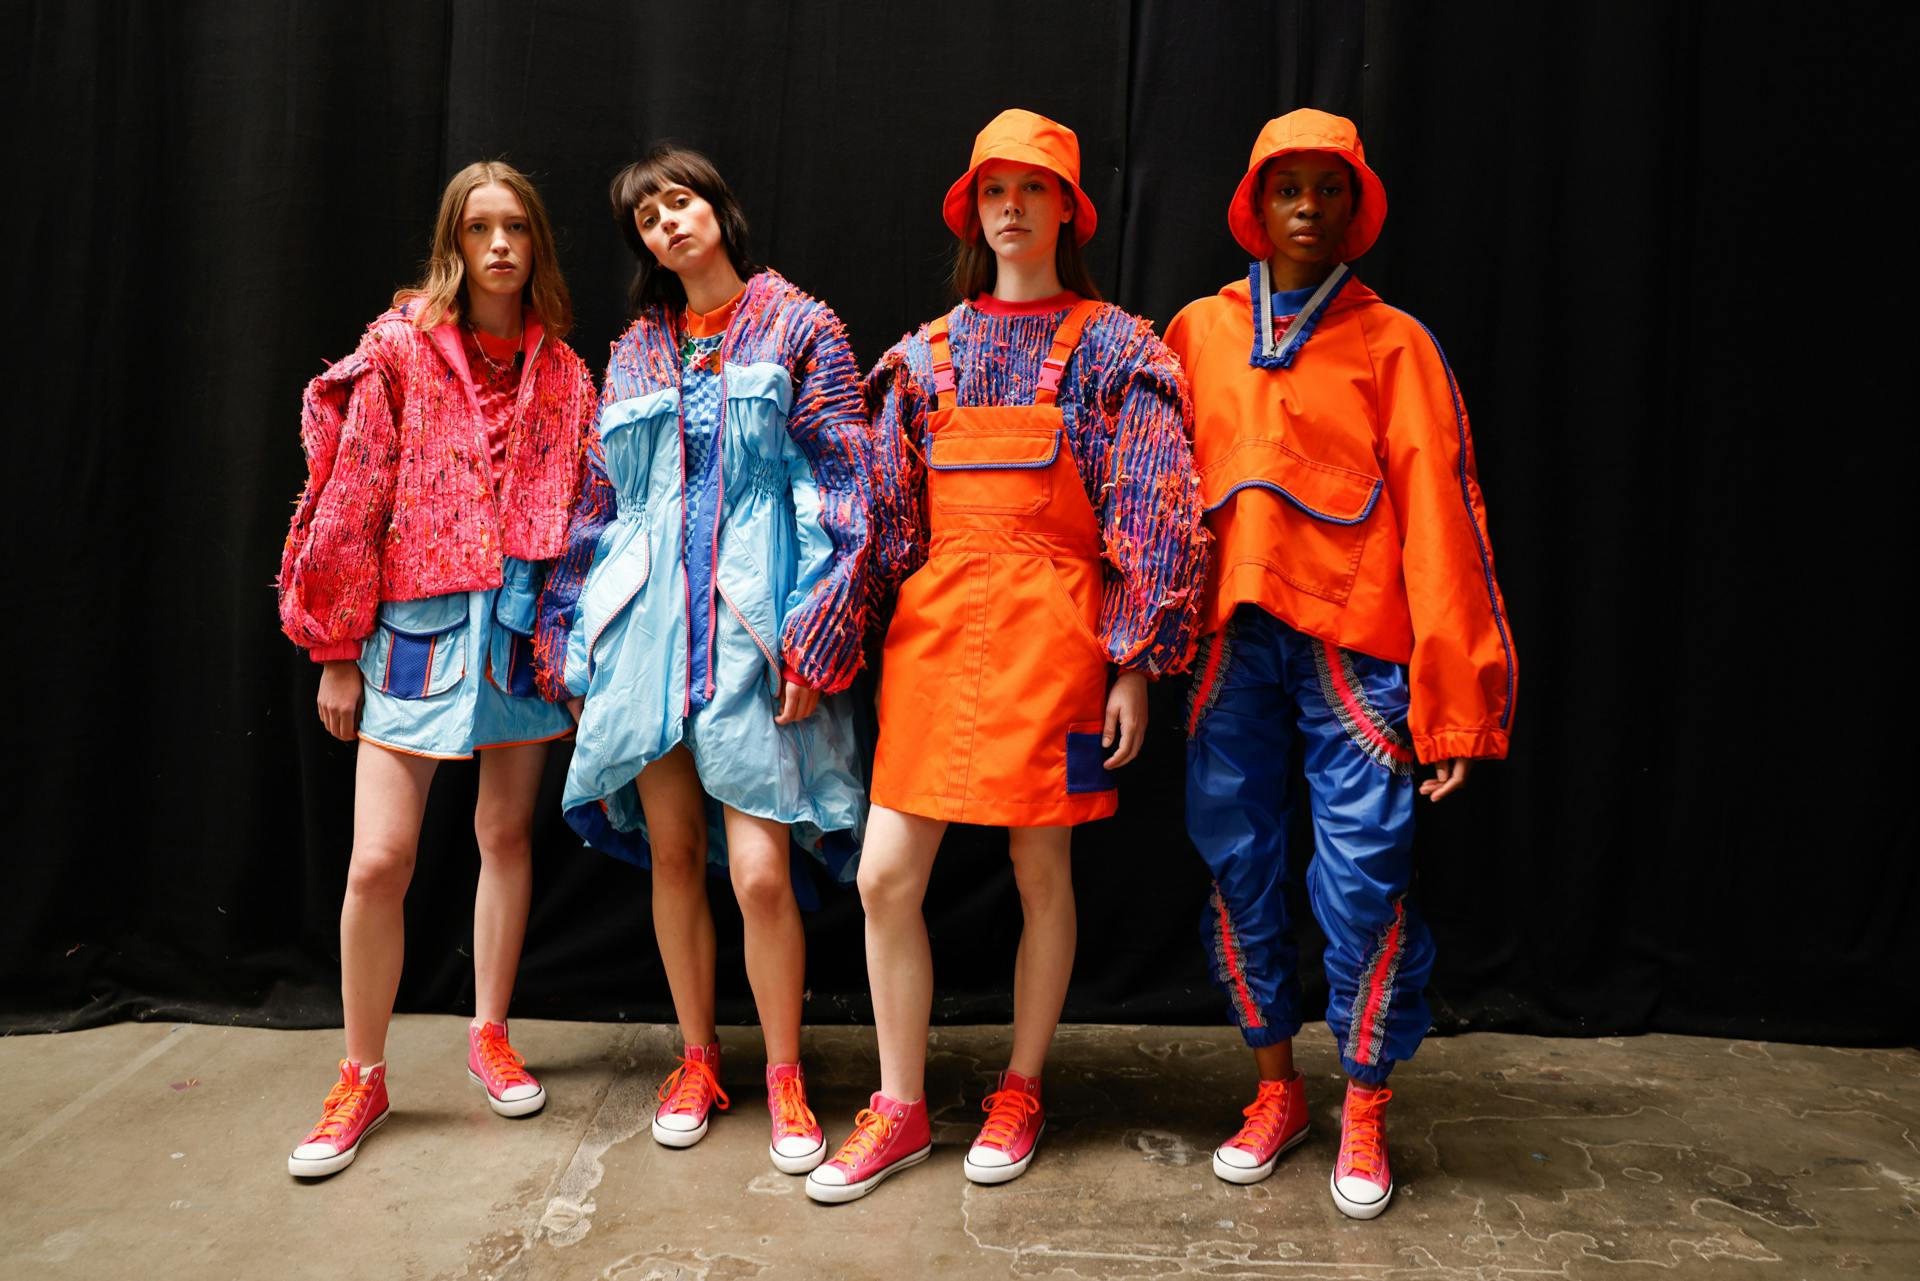 BA Hons Fashion Design student Katie Mc Millan work shot on location at Graduate Fashion Week 2023 in the GFW Collective show photo by Lacey Ayles 33